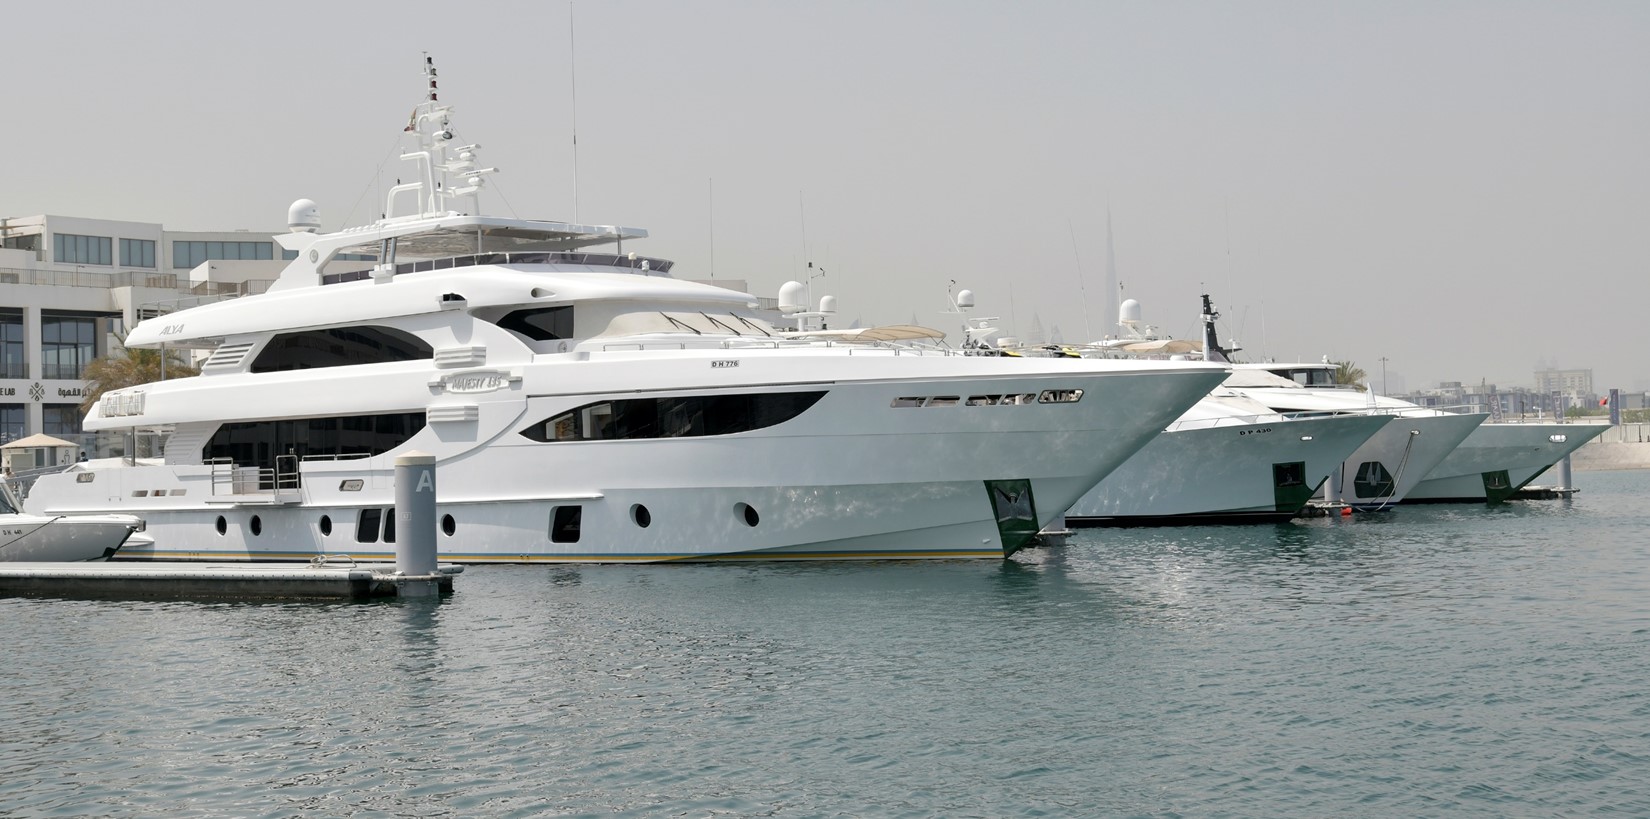 DMCA adopts simplified procedures for inspecting Foreign Visiting Yachts 